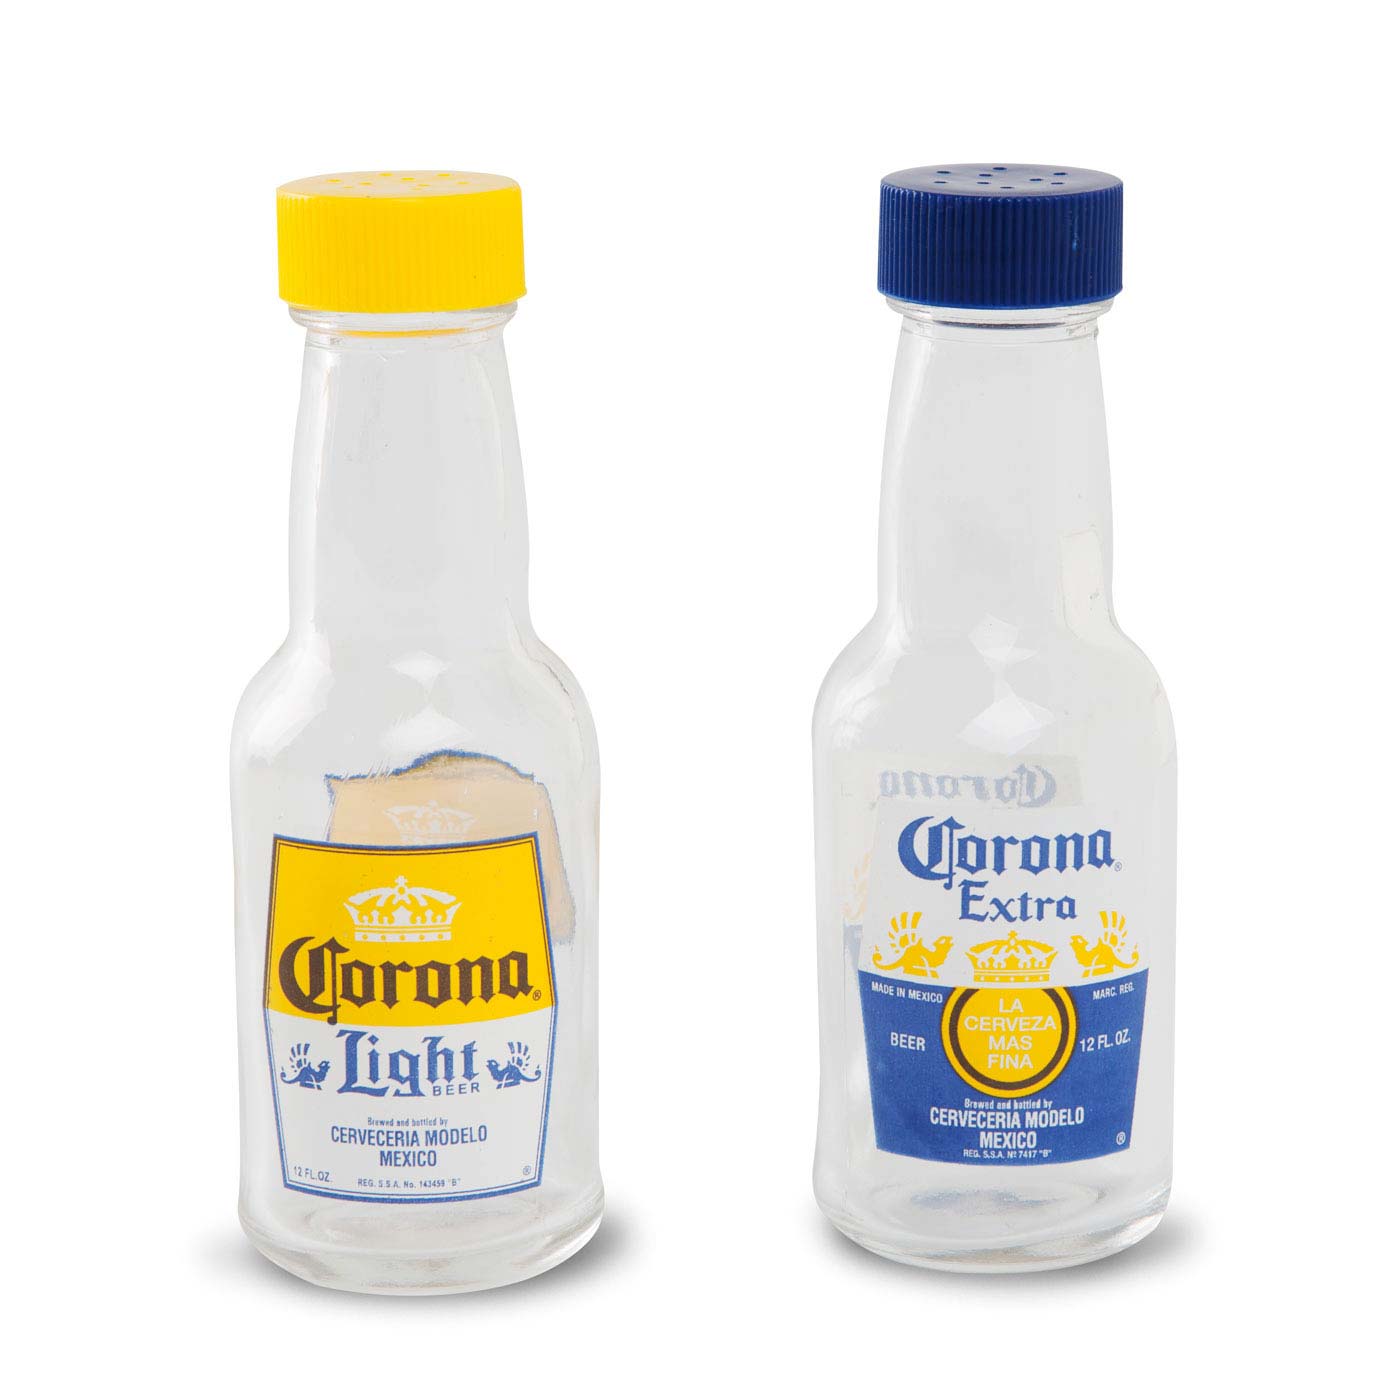 How To Make Salt And Pepper Shakers From Corona Bottles